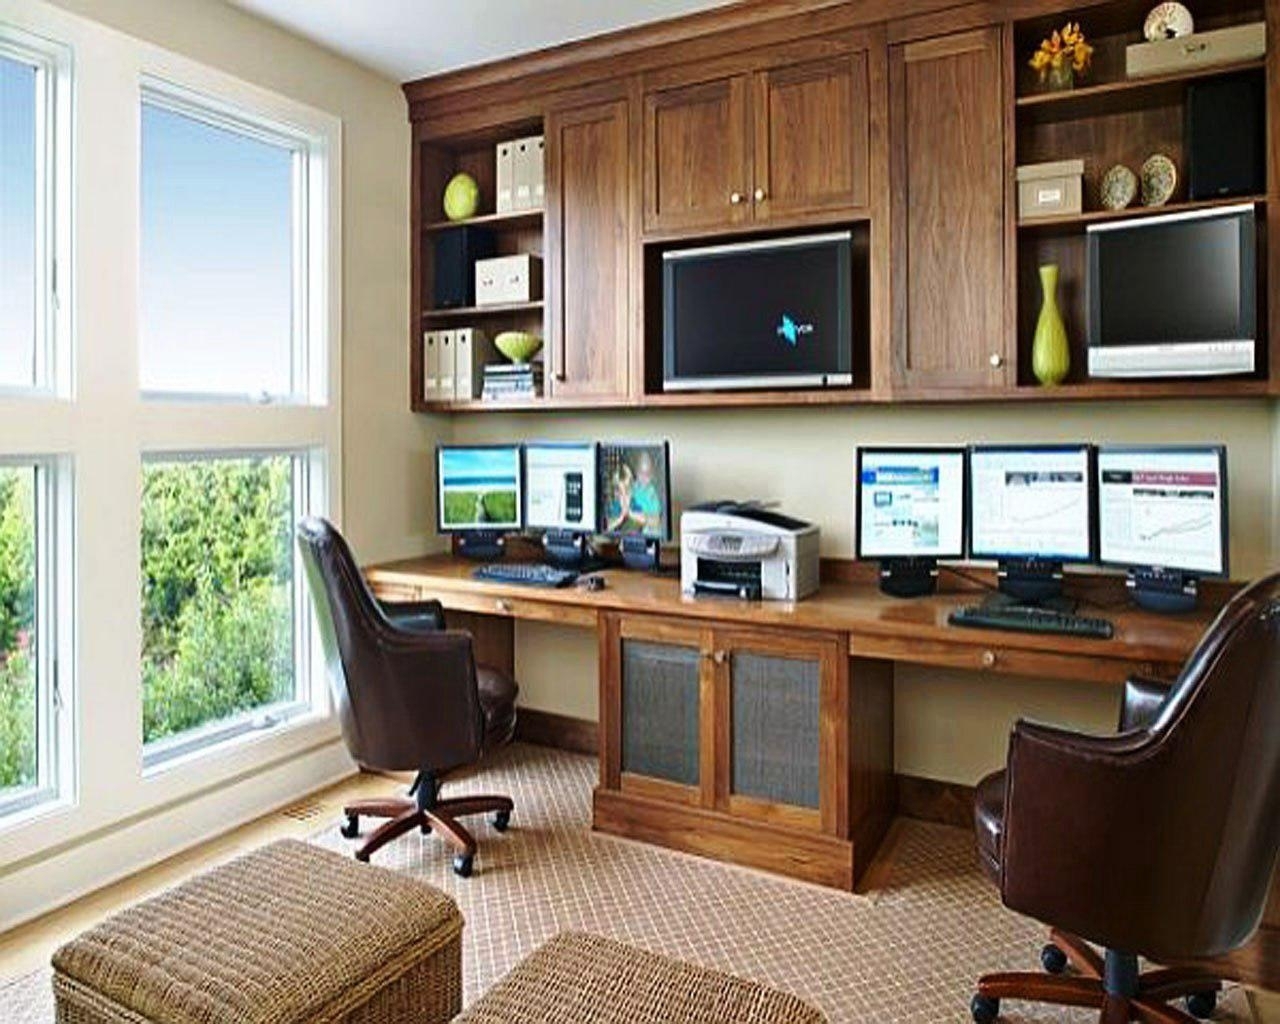 Interior Diy Home Office Ideas Impressive On Interior For Best Within Designs DMA Homes 76528 0 Diy Home Office Ideas